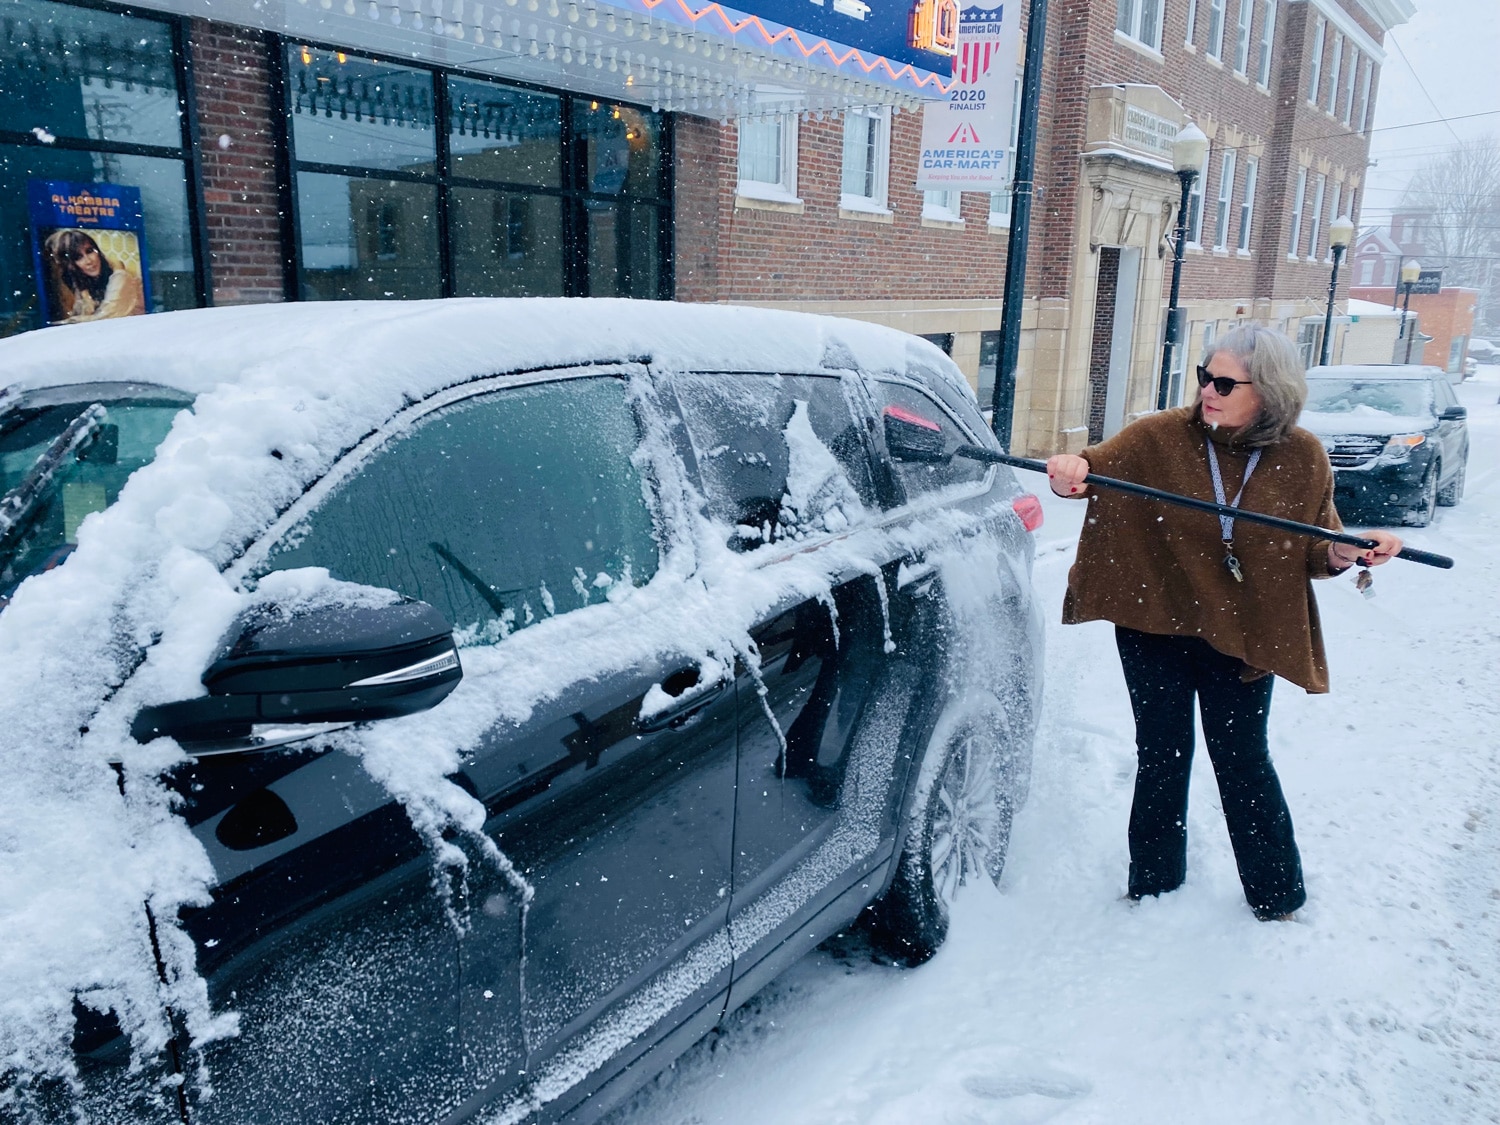 Margaret Prim, executive director of the Pennyroyal Arts Council, brushes snow off her car on Thursday, Jan. 6, 2022, in front of the Alhambra Theatre in Hopkinsville. (Photo by Jennifer P. Brown)